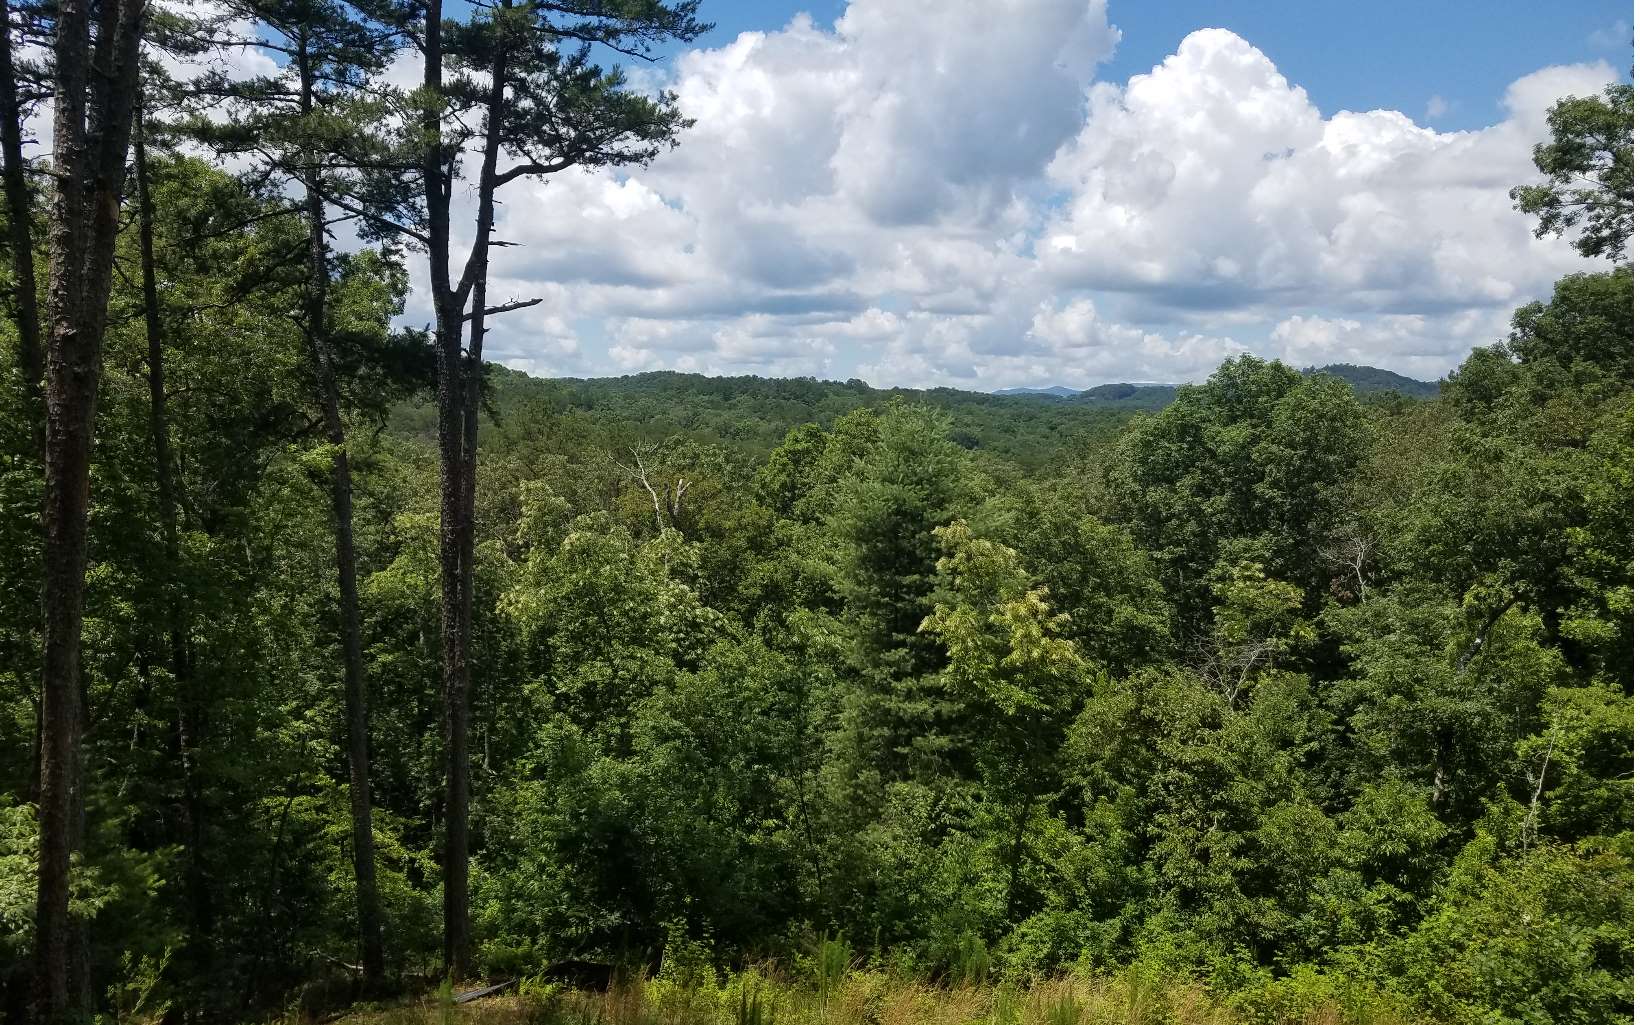 Great mountain view lot in established neighborhood., short range mountain view, perked and ready to build. All paved roads, underground utilities, city water, near golf course and minutes to Blue Ridge. Deeded Toccoa River access. Excellent rental area. Near Canoe Launch and Golf Course.